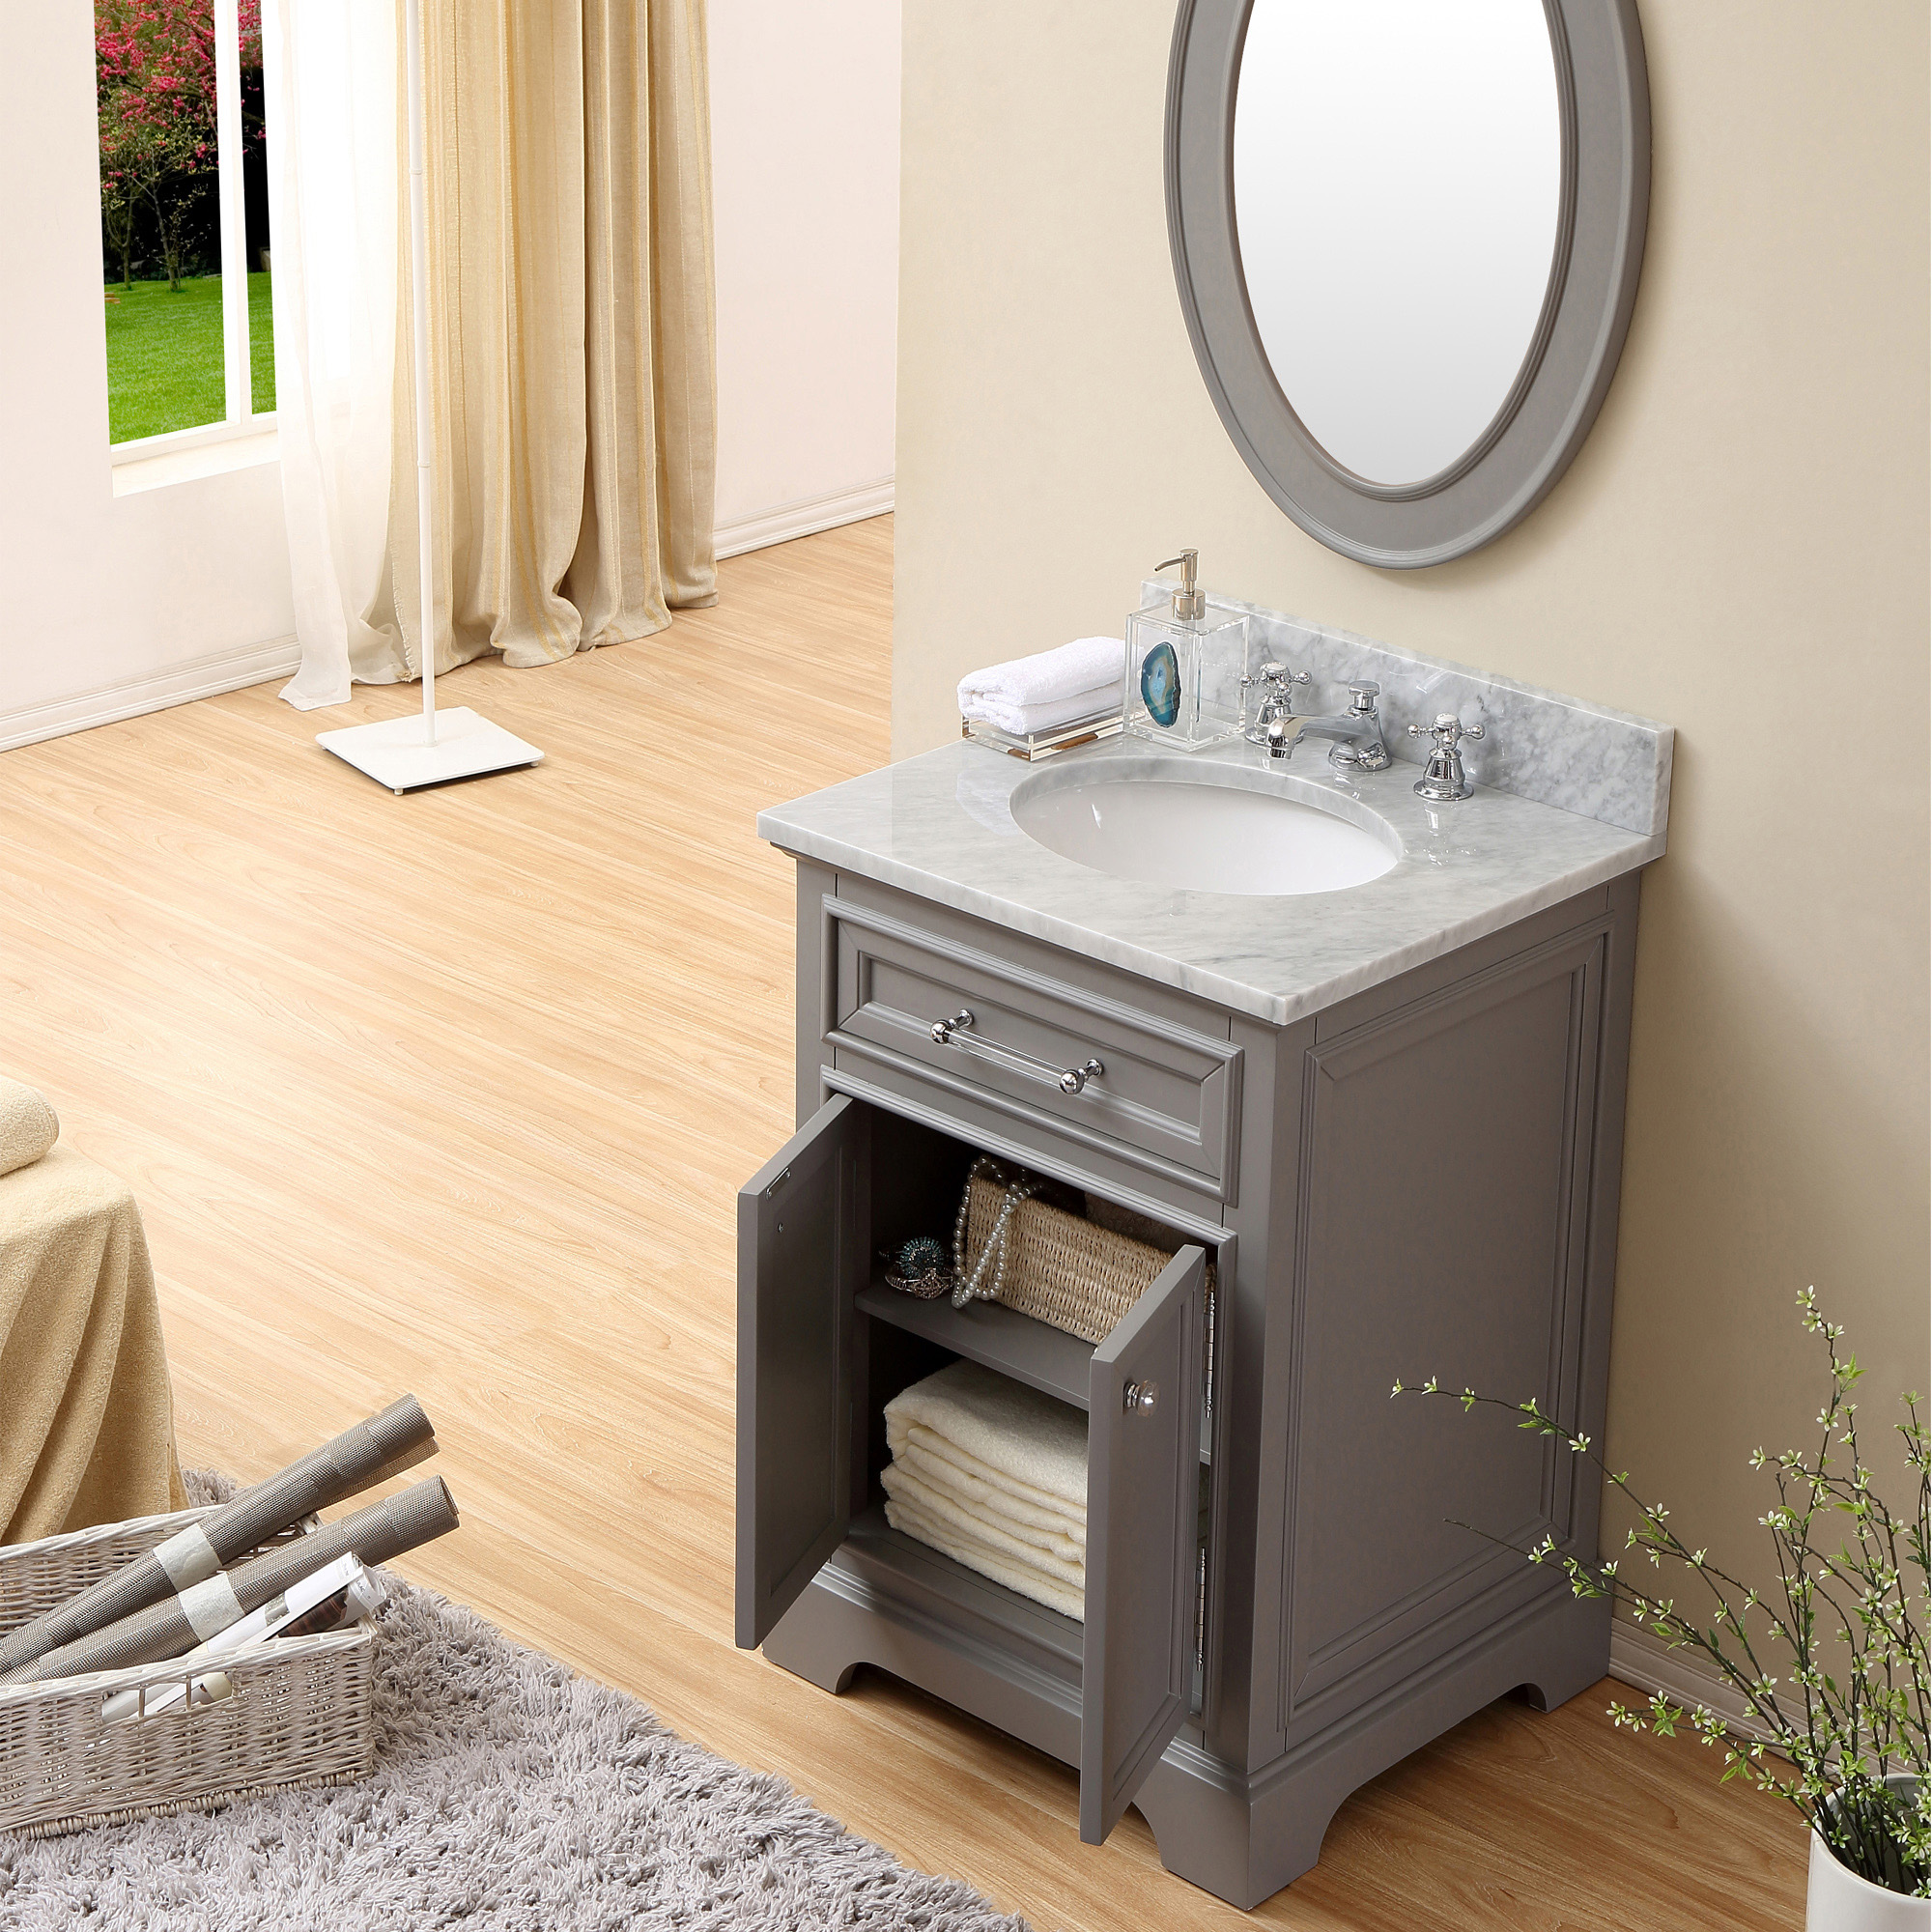 24" Cashmere Grey Single Sink Bathroom Vanity with White Carrara Marble Top